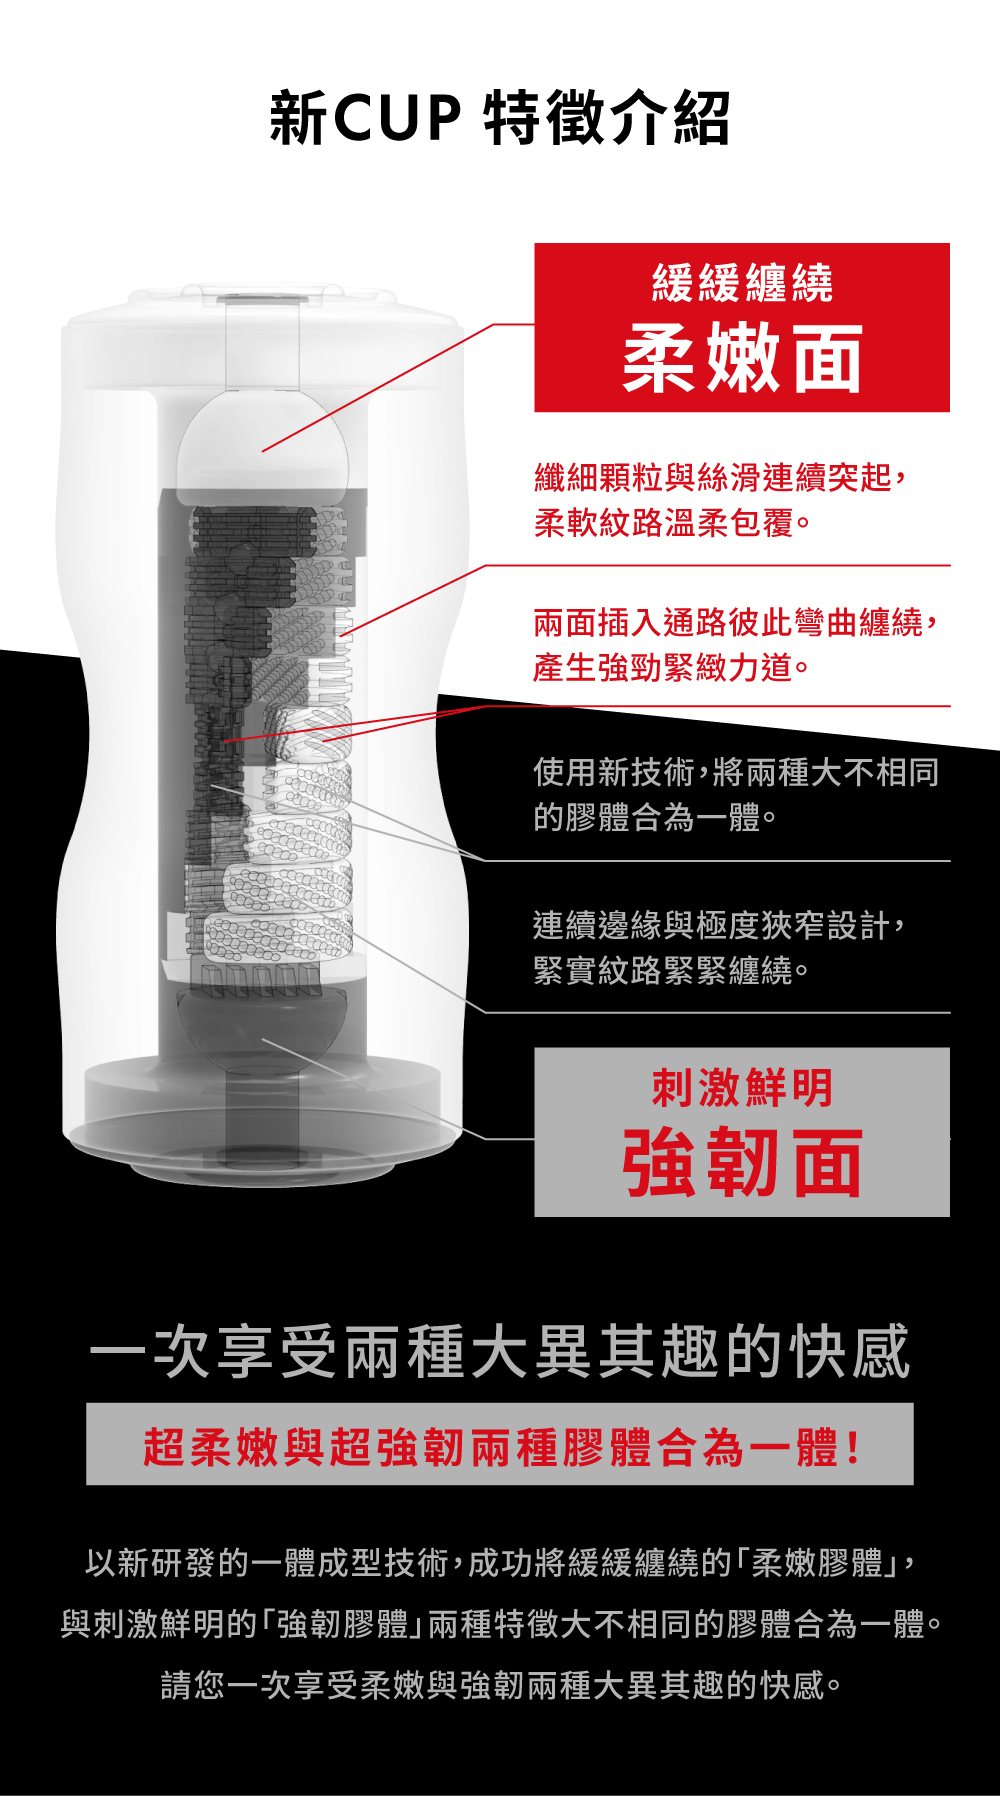 TENGA Twisting Cup Tough Edition Masturbation Cup Valentine's Day Gift -  Shop tenga-tw Adult Products - Pinkoi